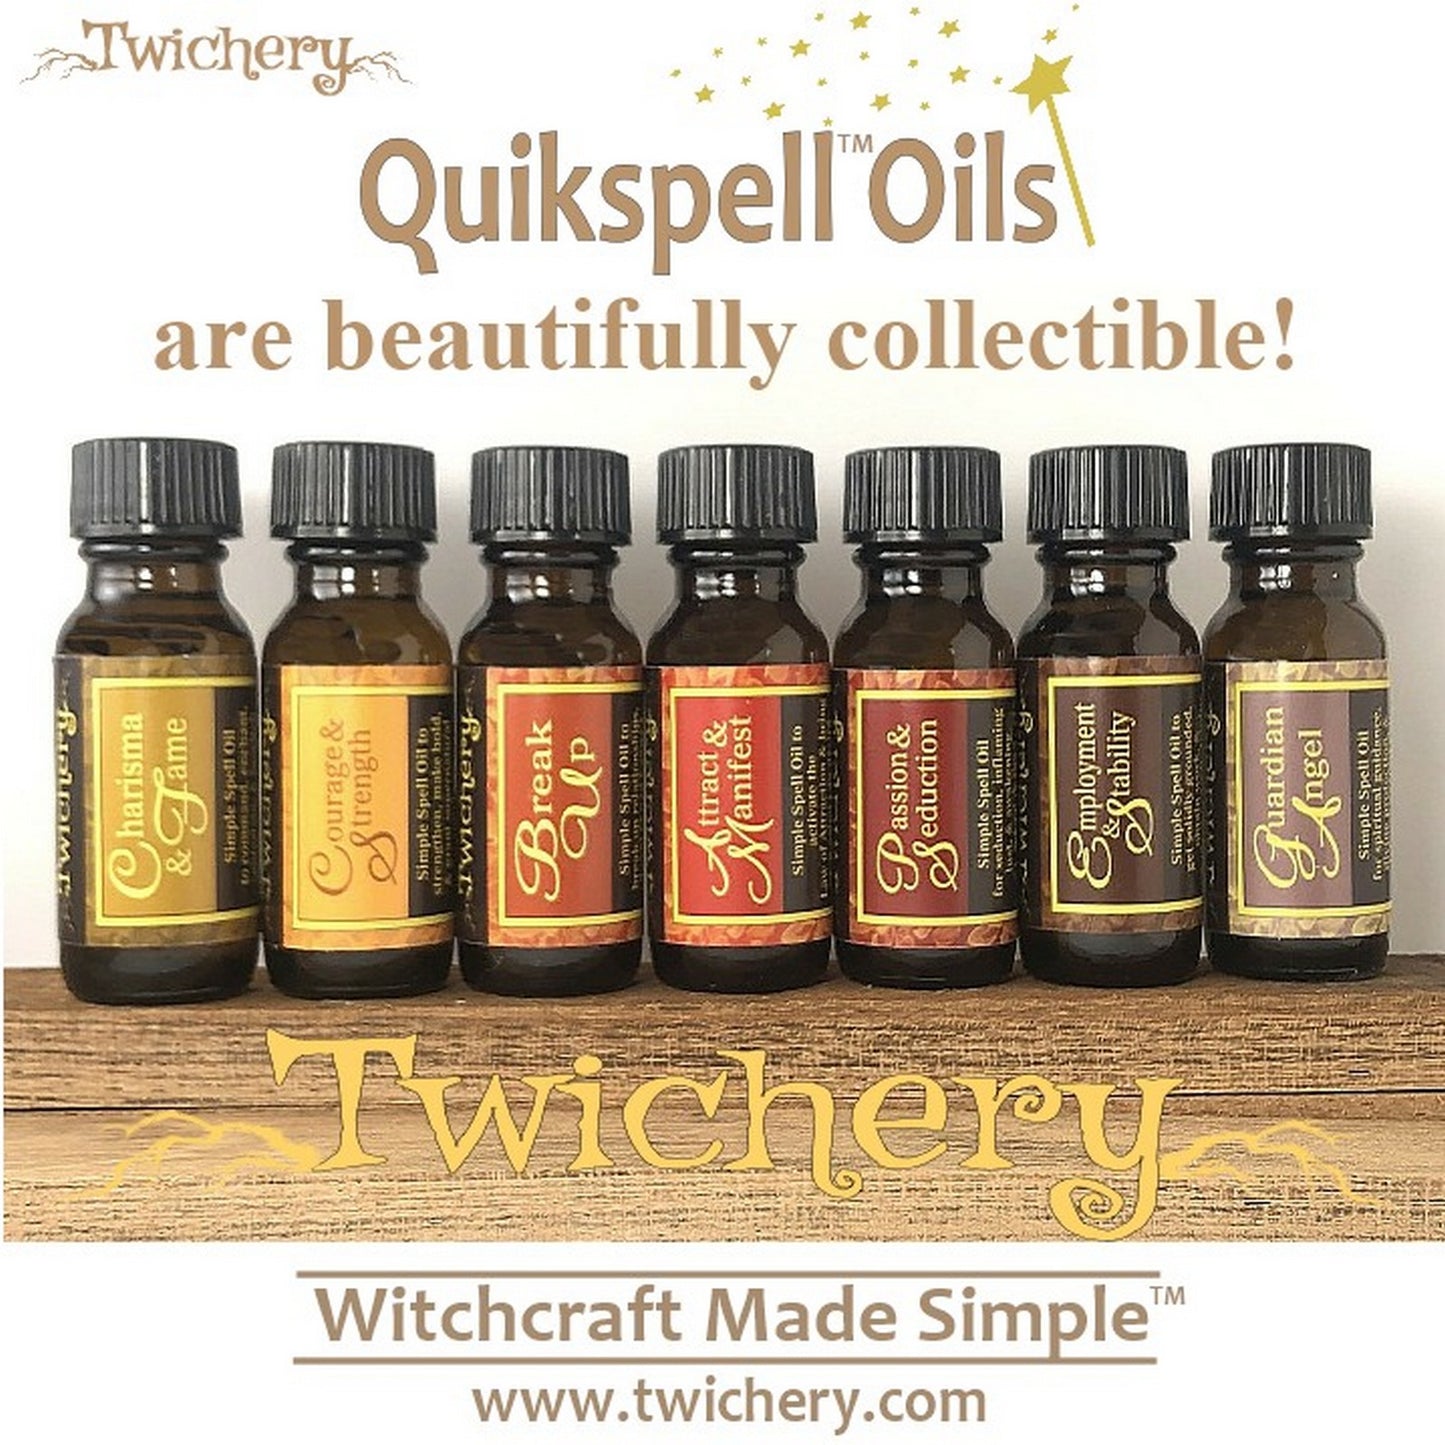 Collect all 24 Twichery Quikspell Oils for all your magickal needs, including dealing with legal troubles. Luck with the Law and Police. Hoodoo, Voodoo, Wicca, Witchcraft Made Simple